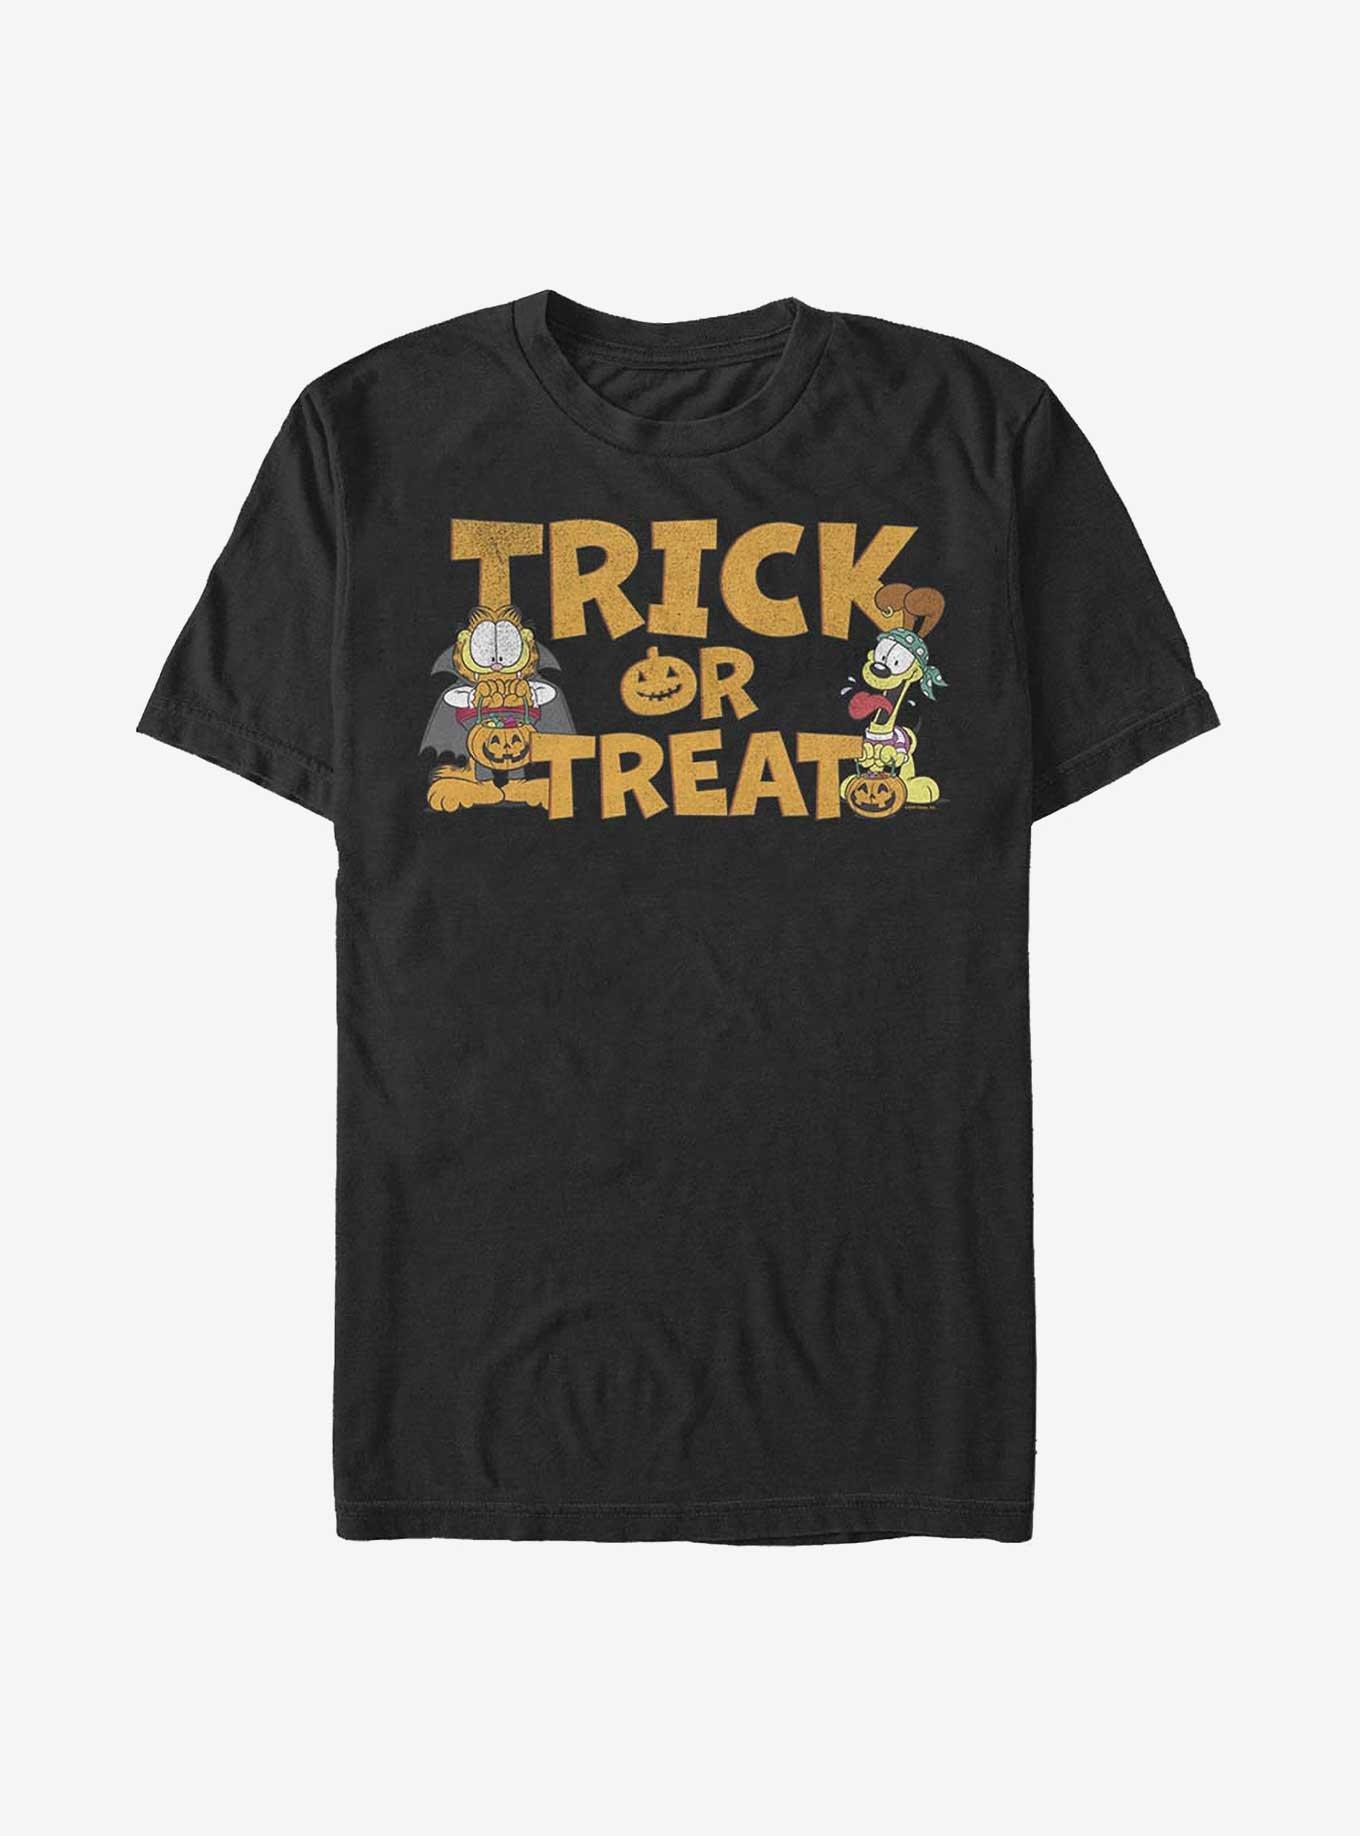 Garfield and Odie Halloween Trick or Treat T-Shirt, BLACK, hi-res